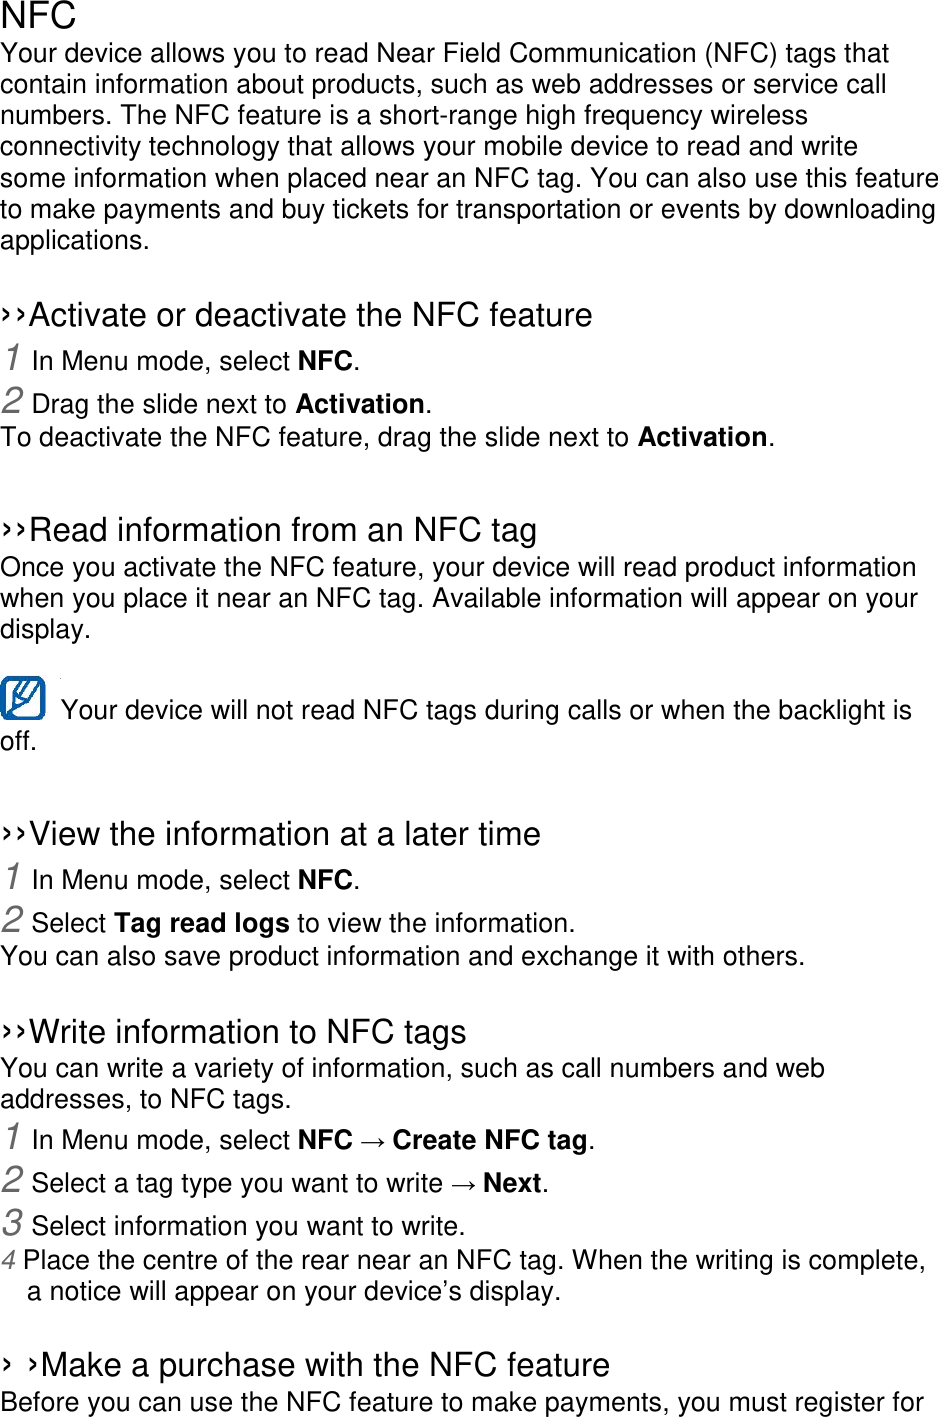 NFC Your device allows you to read Near Field Communication (NFC) tags that contain information about products, such as web addresses or service call numbers. The NFC feature is a short-range high frequency wireless connectivity technology that allows your mobile device to read and write some information when placed near an NFC tag. You can also use this feature to make payments and buy tickets for transportation or events by downloading applications.    ››Activate or deactivate the NFC feature 1 In Menu mode, select NFC. 2 Drag the slide next to Activation. To deactivate the NFC feature, drag the slide next to Activation.  ››Read information from an NFC tag Once you activate the NFC feature, your device will read product information when you place it near an NFC tag. Available information will appear on your display.  Your device will not read NFC tags during calls or when the backlight is   off.  ››View the information at a later time 1 In Menu mode, select NFC. 2 Select Tag read logs to view the information. You can also save product information and exchange it with others.  ››Write information to NFC tags   You can write a variety of information, such as call numbers and web addresses, to NFC tags. 1 In Menu mode, select NFC → Create NFC tag. 2 Select a tag type you want to write → Next. 3 Select information you want to write. 4 Place the centre of the rear near an NFC tag. When the writing is complete, a notice will appear on your device’s display.  › ›Make a purchase with the NFC feature   Before you can use the NFC feature to make payments, you must register for 